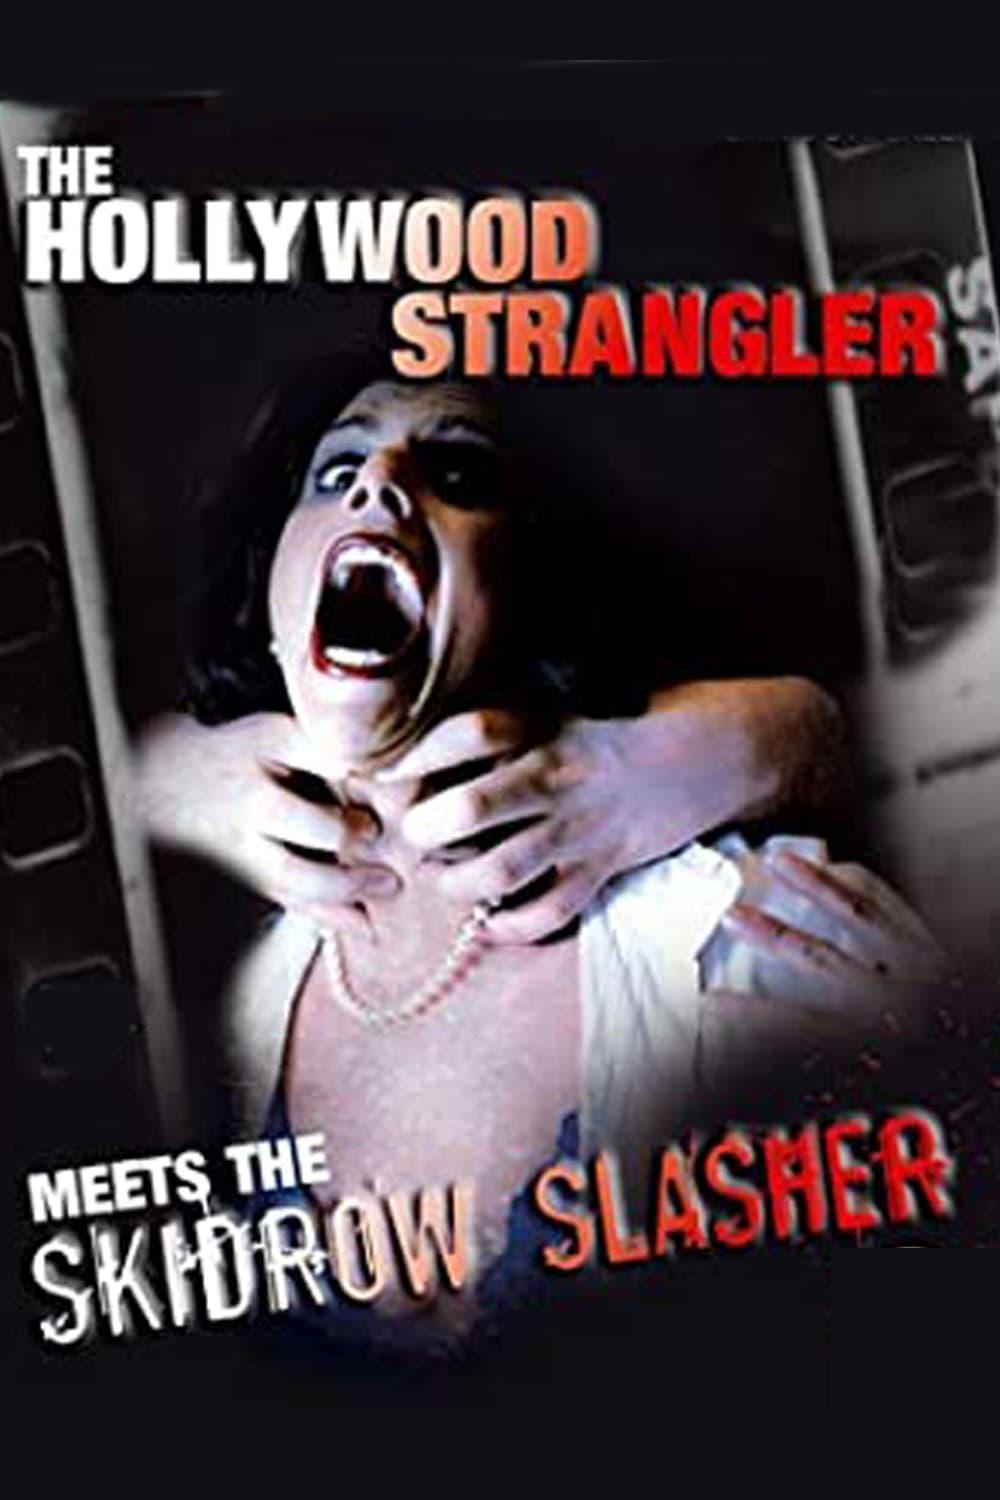 The Hollywood Strangler Meets the Skid Row Slasher poster